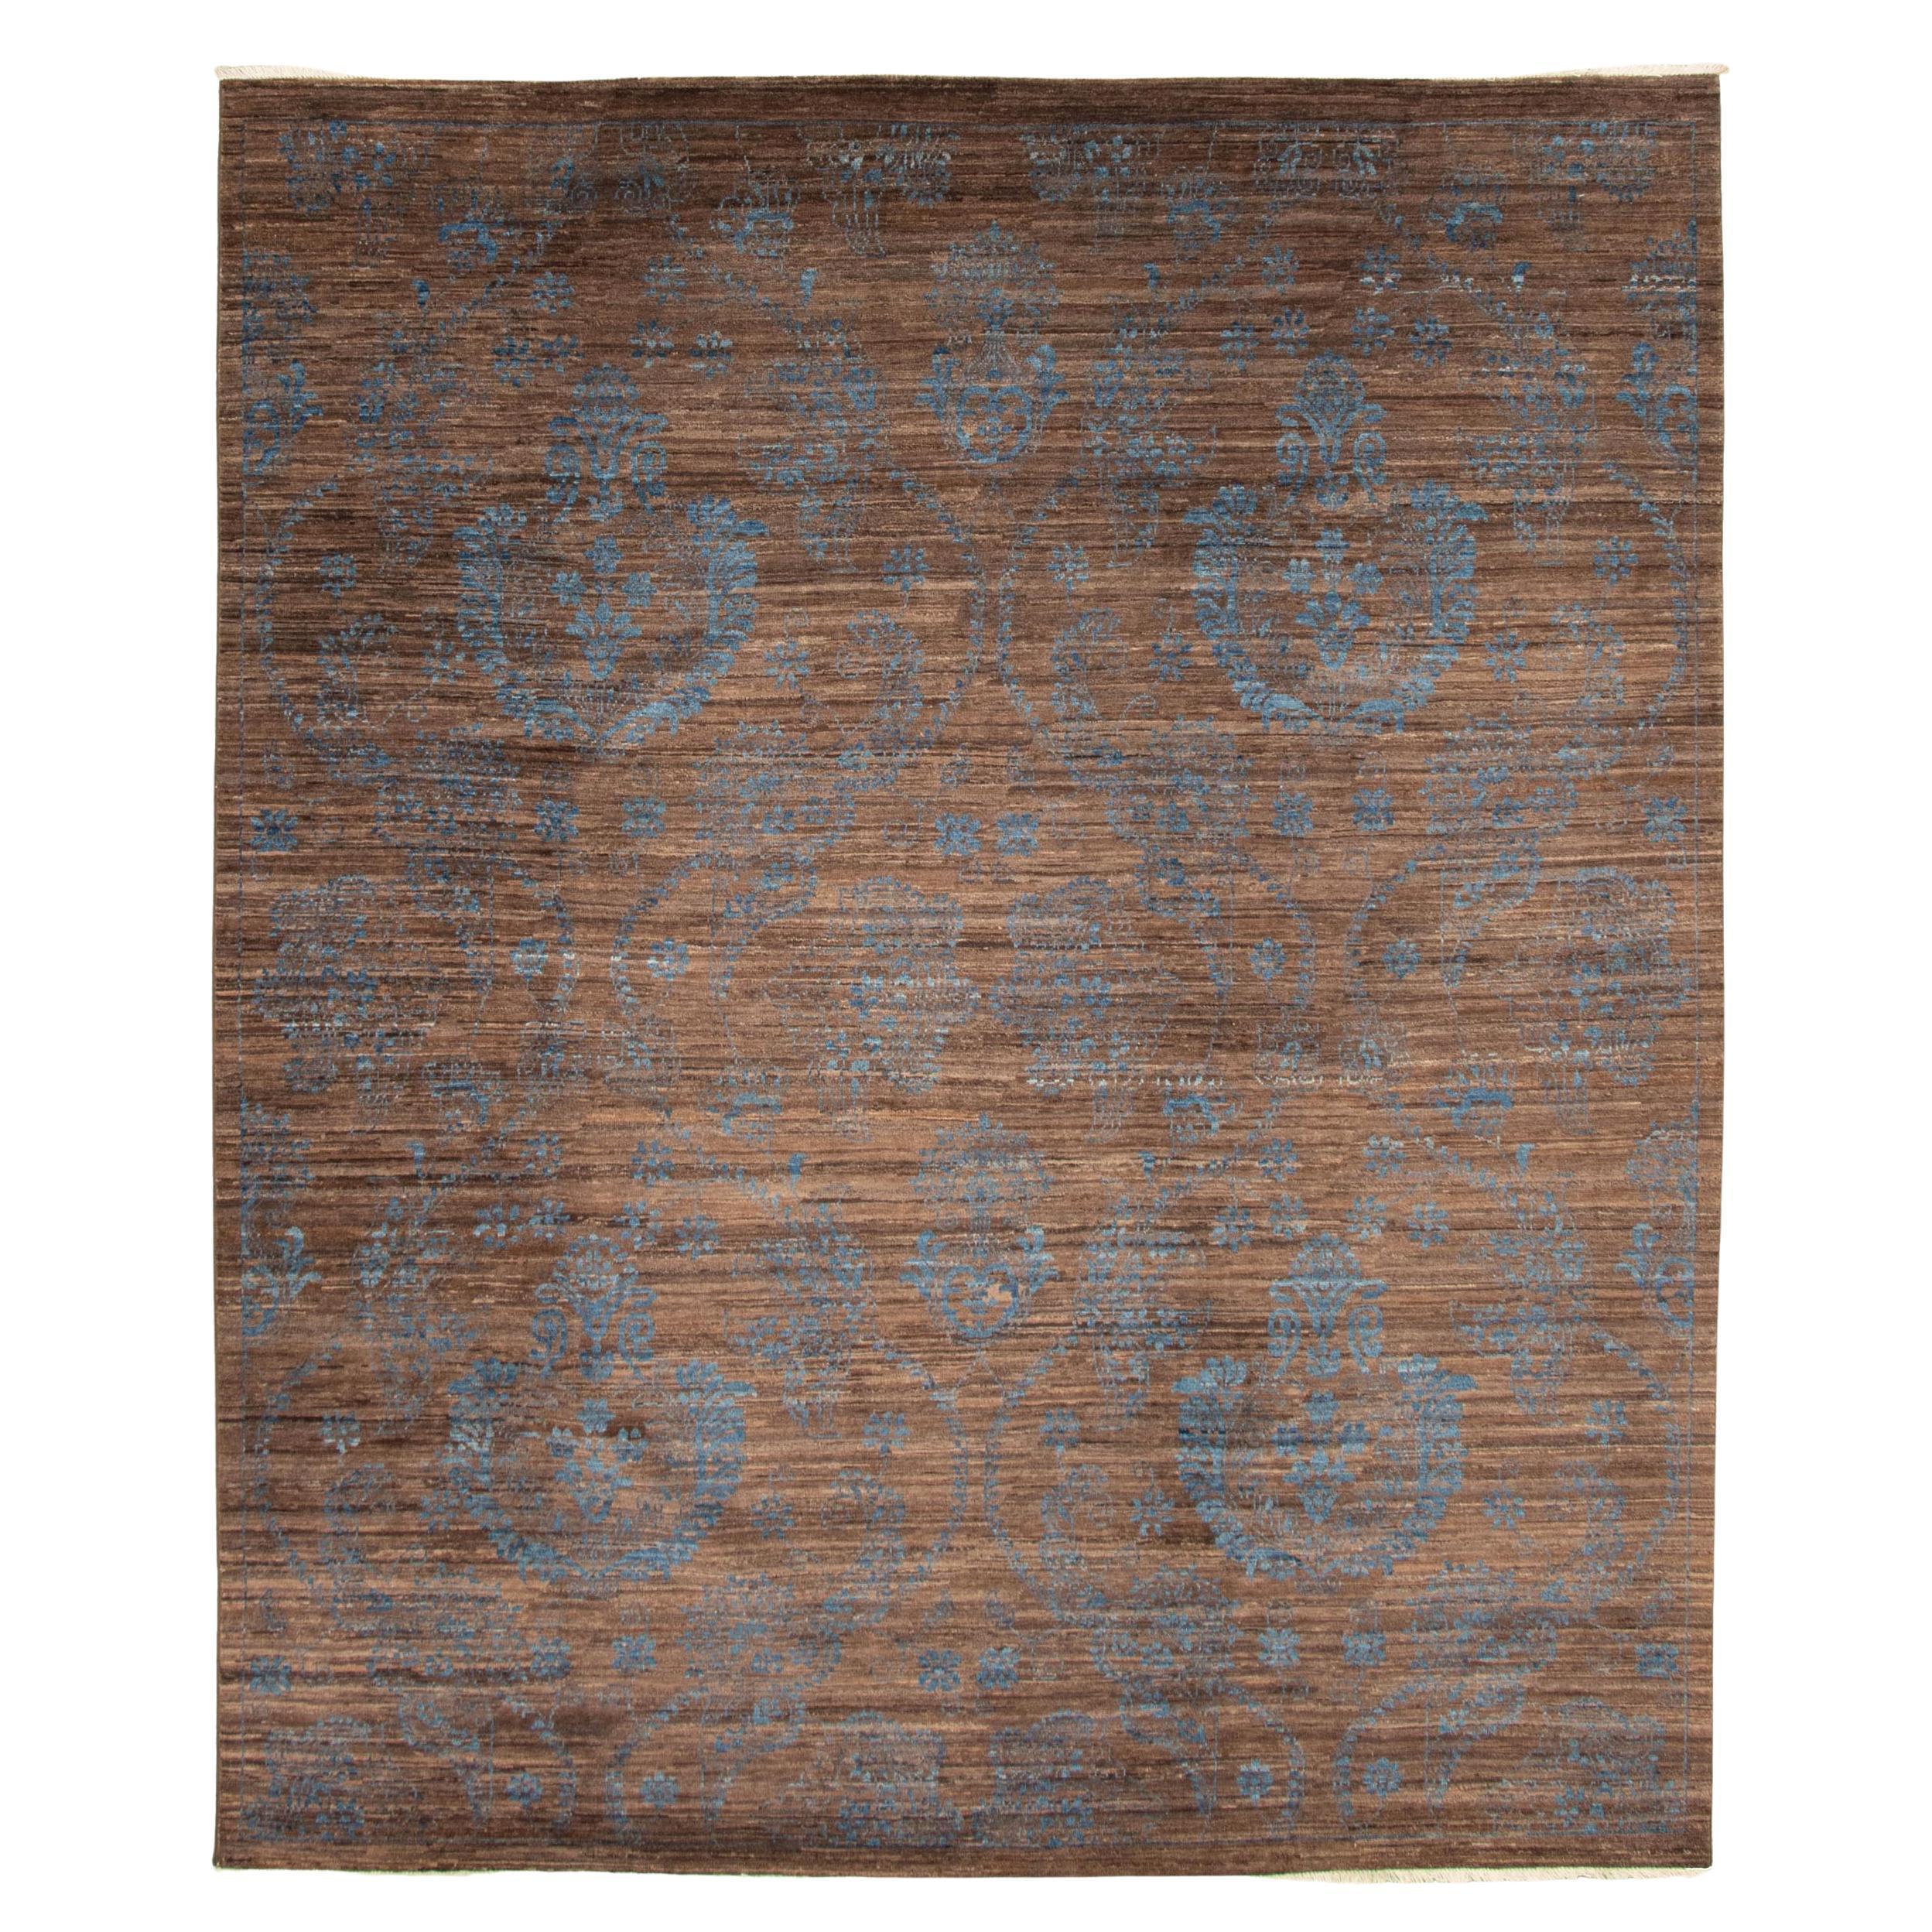 Hand-Knotted Wool Blue and Brown Persian Rug, 8’ x 10’